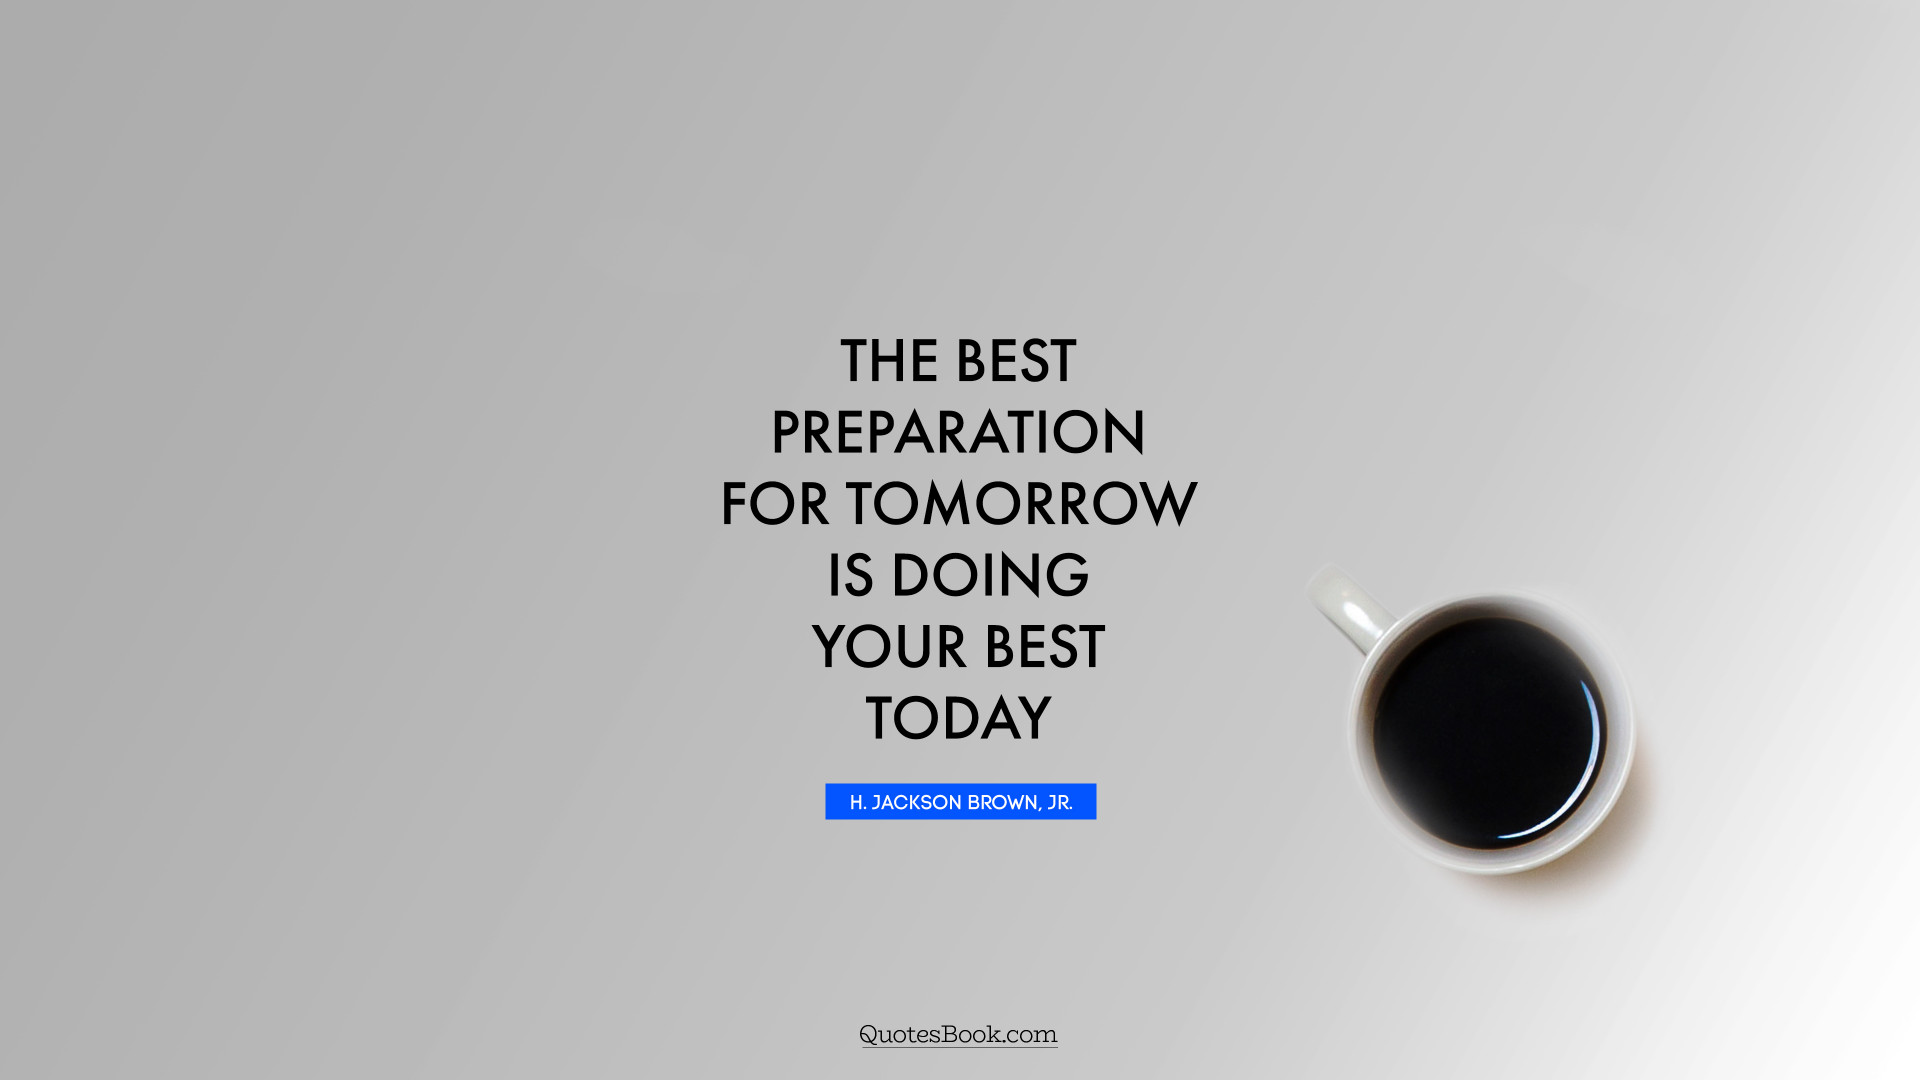 the best preparation for tomorrow is doing your best today 1920x1080 589